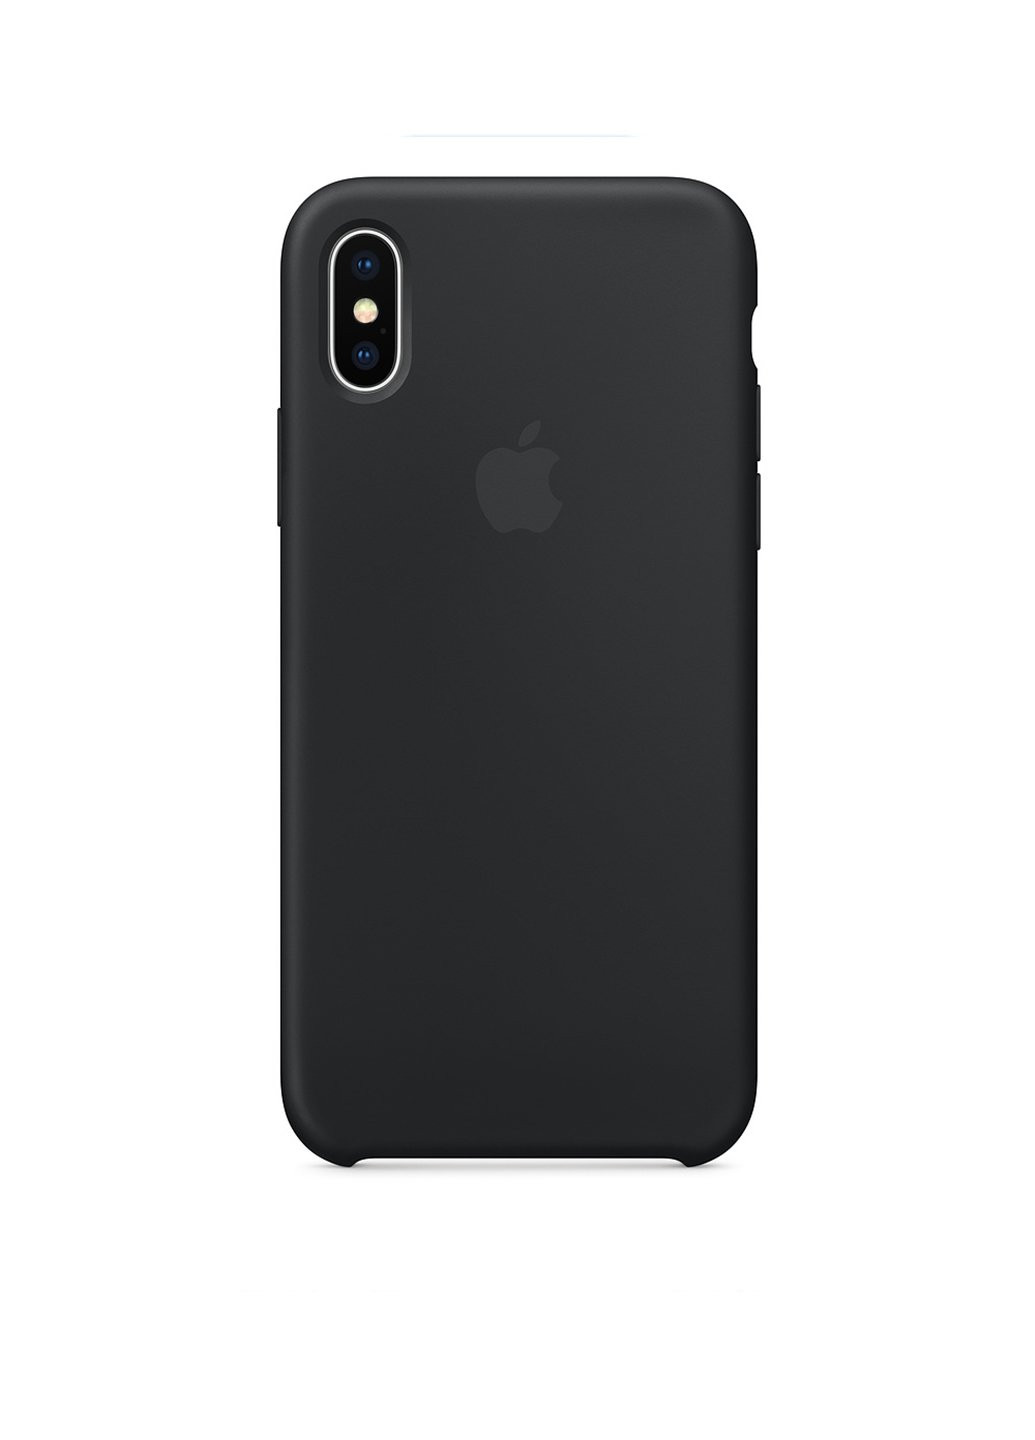 Чехол Silicone case for iPhone XR Black Apple (220821812)